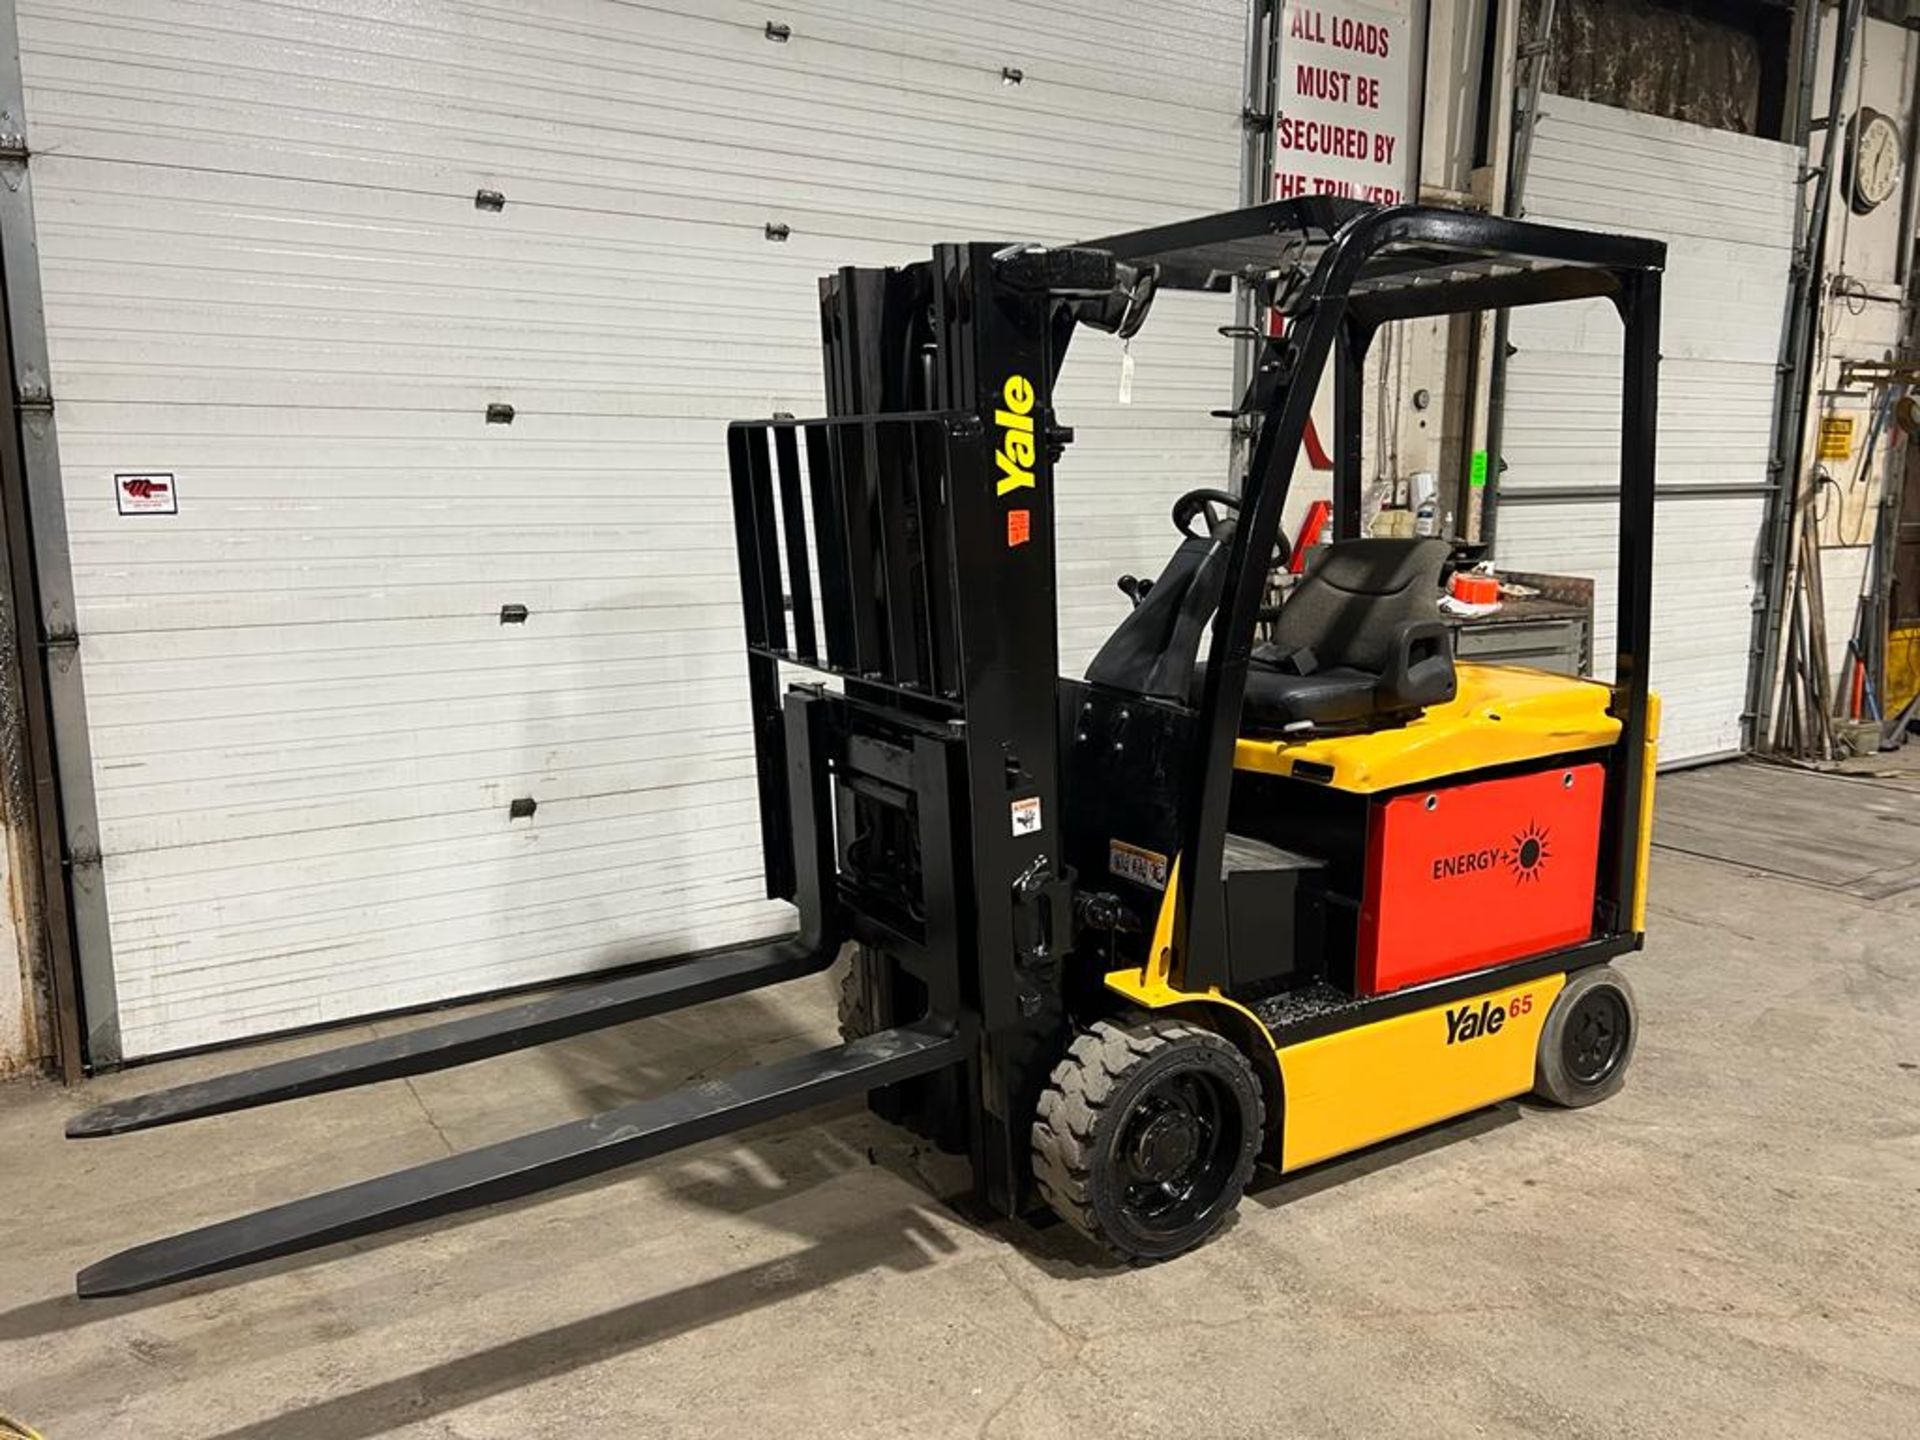 NICE 2011 Yale model 65 - 6,500lbs Capacity Forklift with NEW BATTERY 48V NEW FORKS 60" LOW HOURS